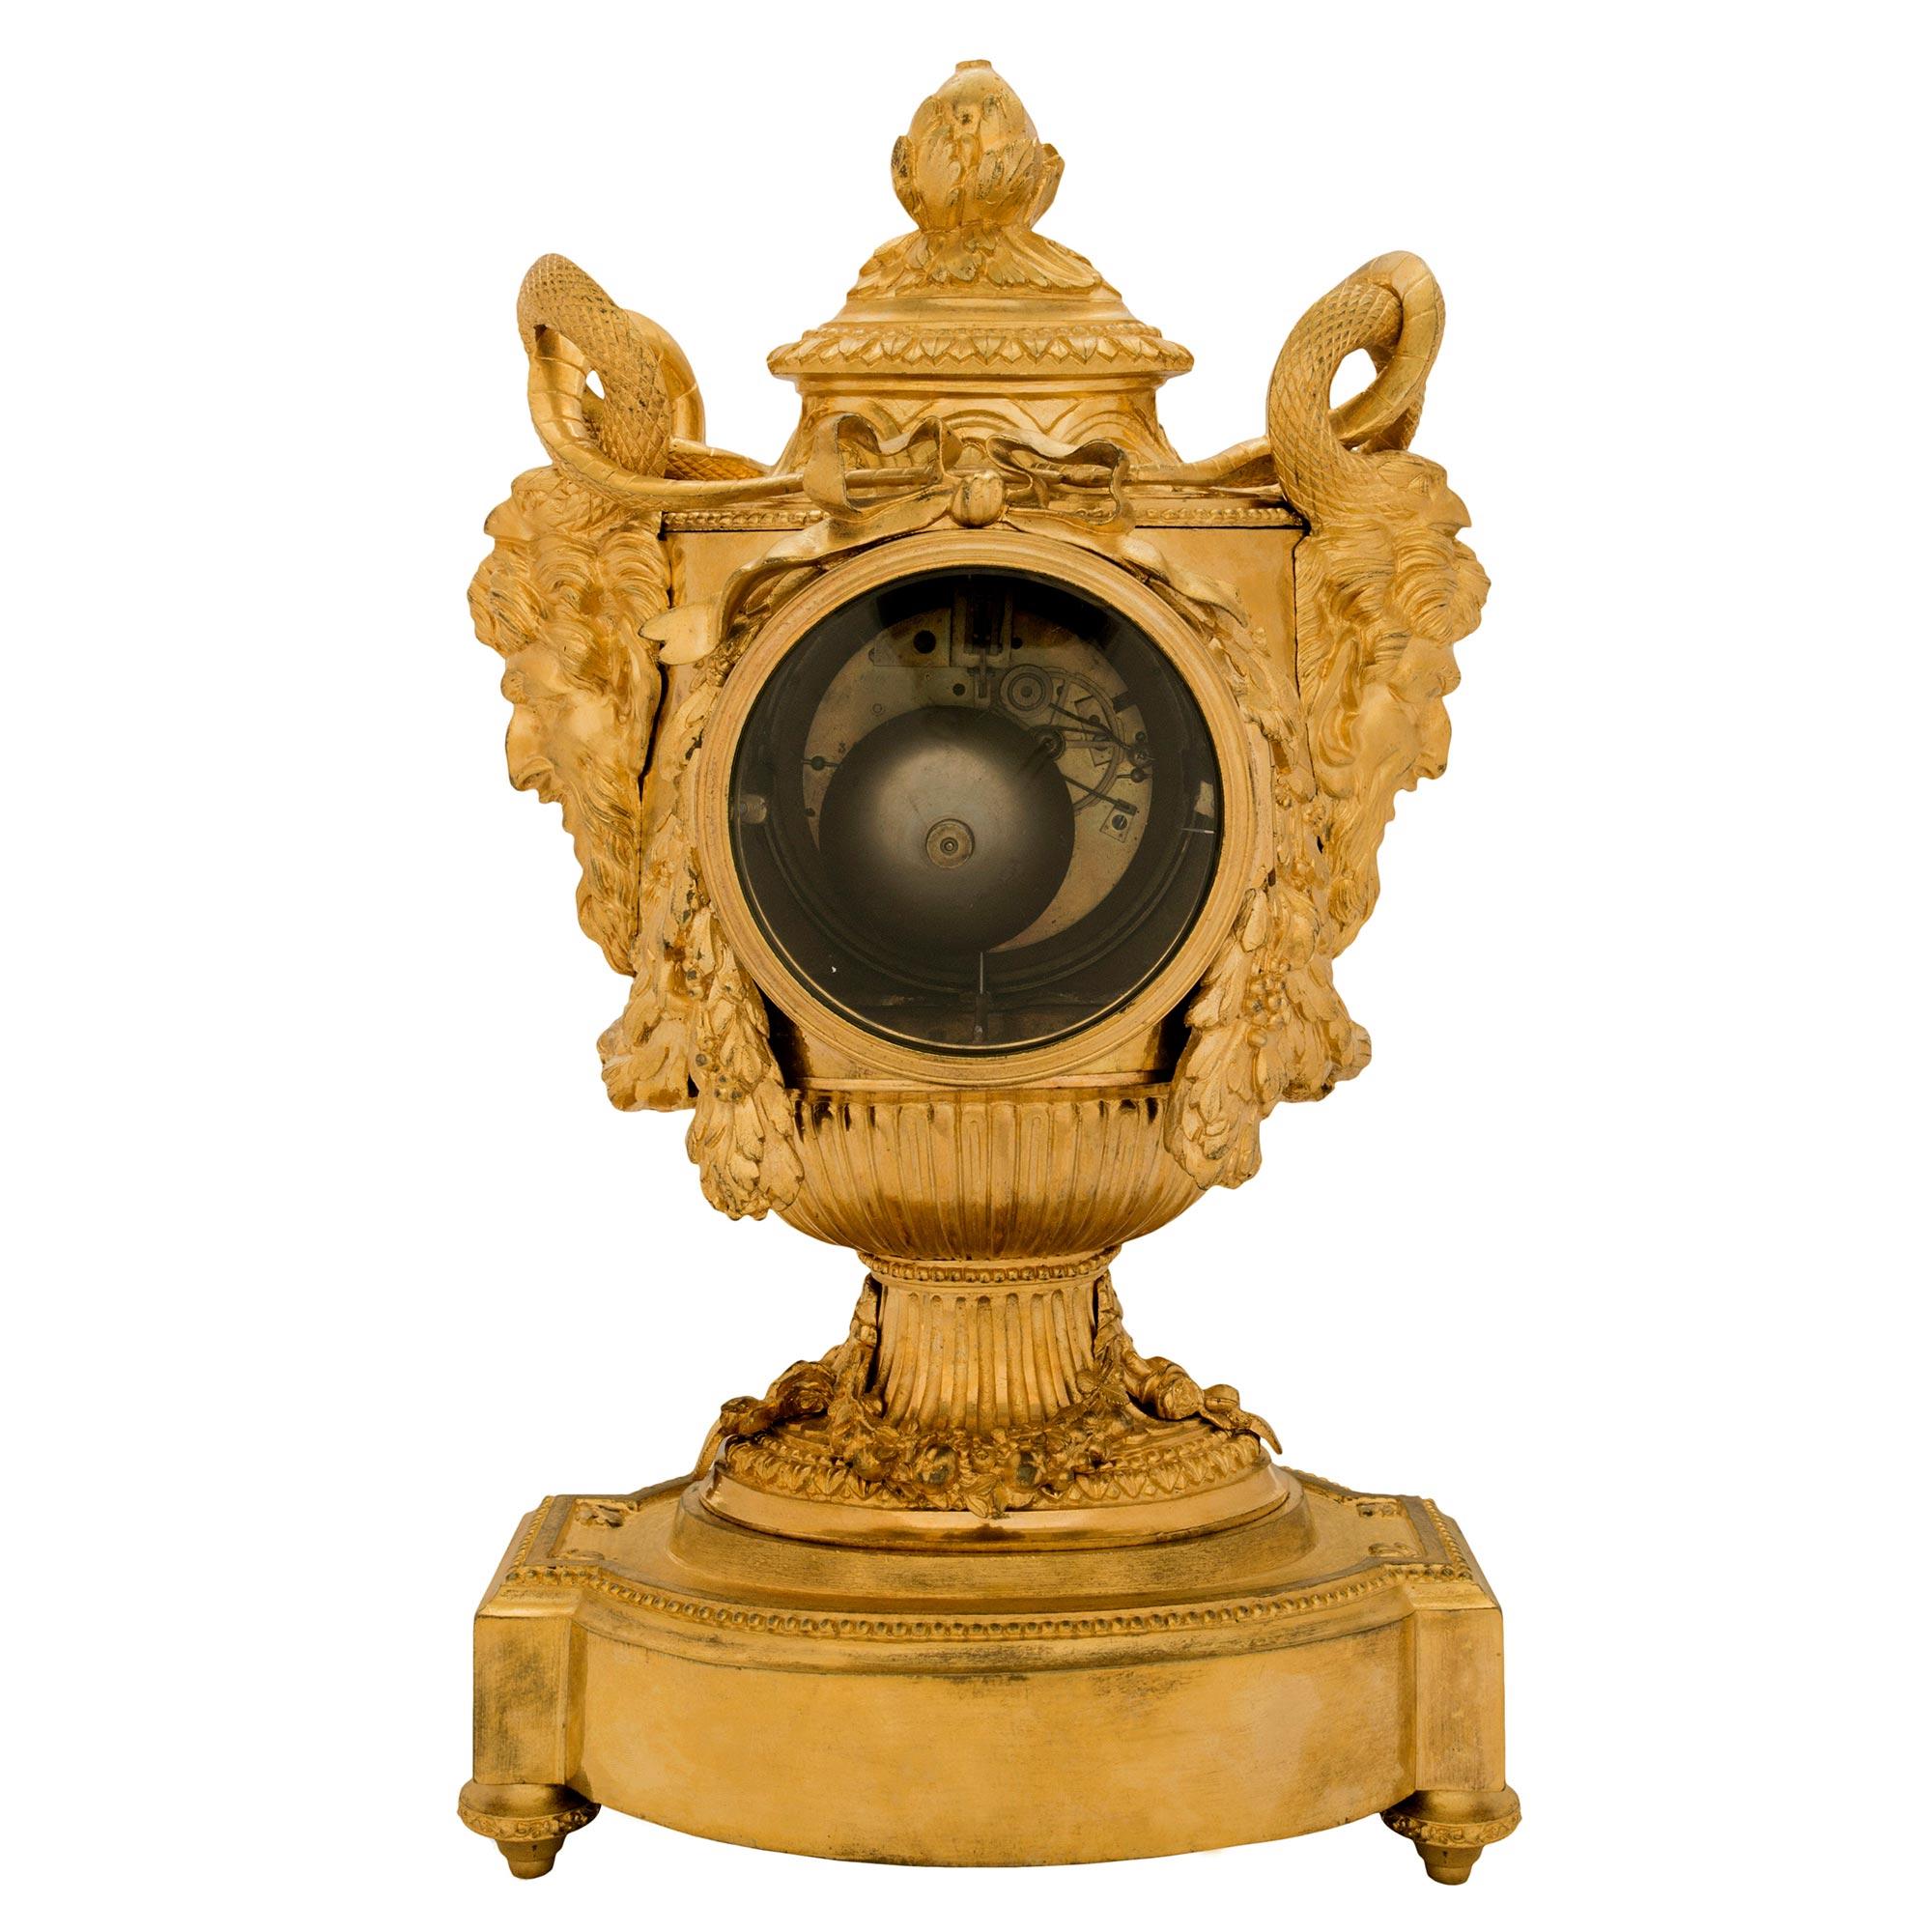 French Early 19th Century Louis XVI Style Ormolu Clock, 'Signed Lepaute Paris' For Sale 5